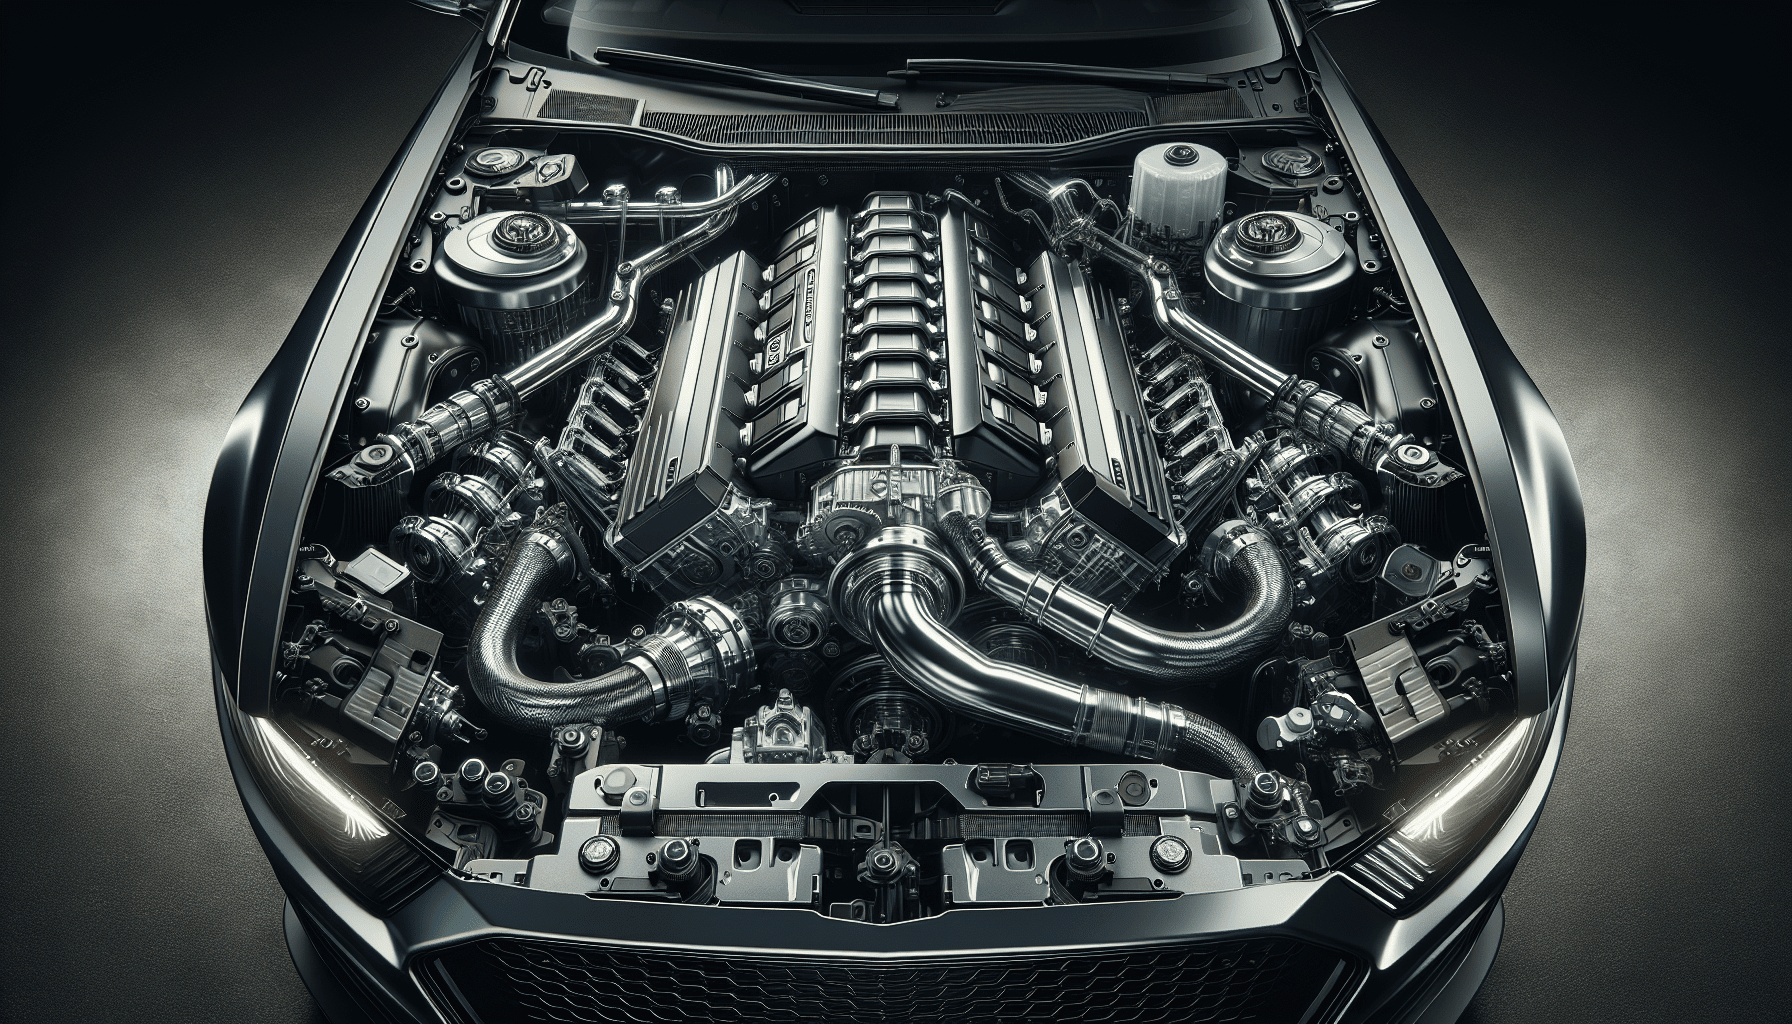 What Is The Horsepower Of The 3.5 L EcoBoost V6 Engine?